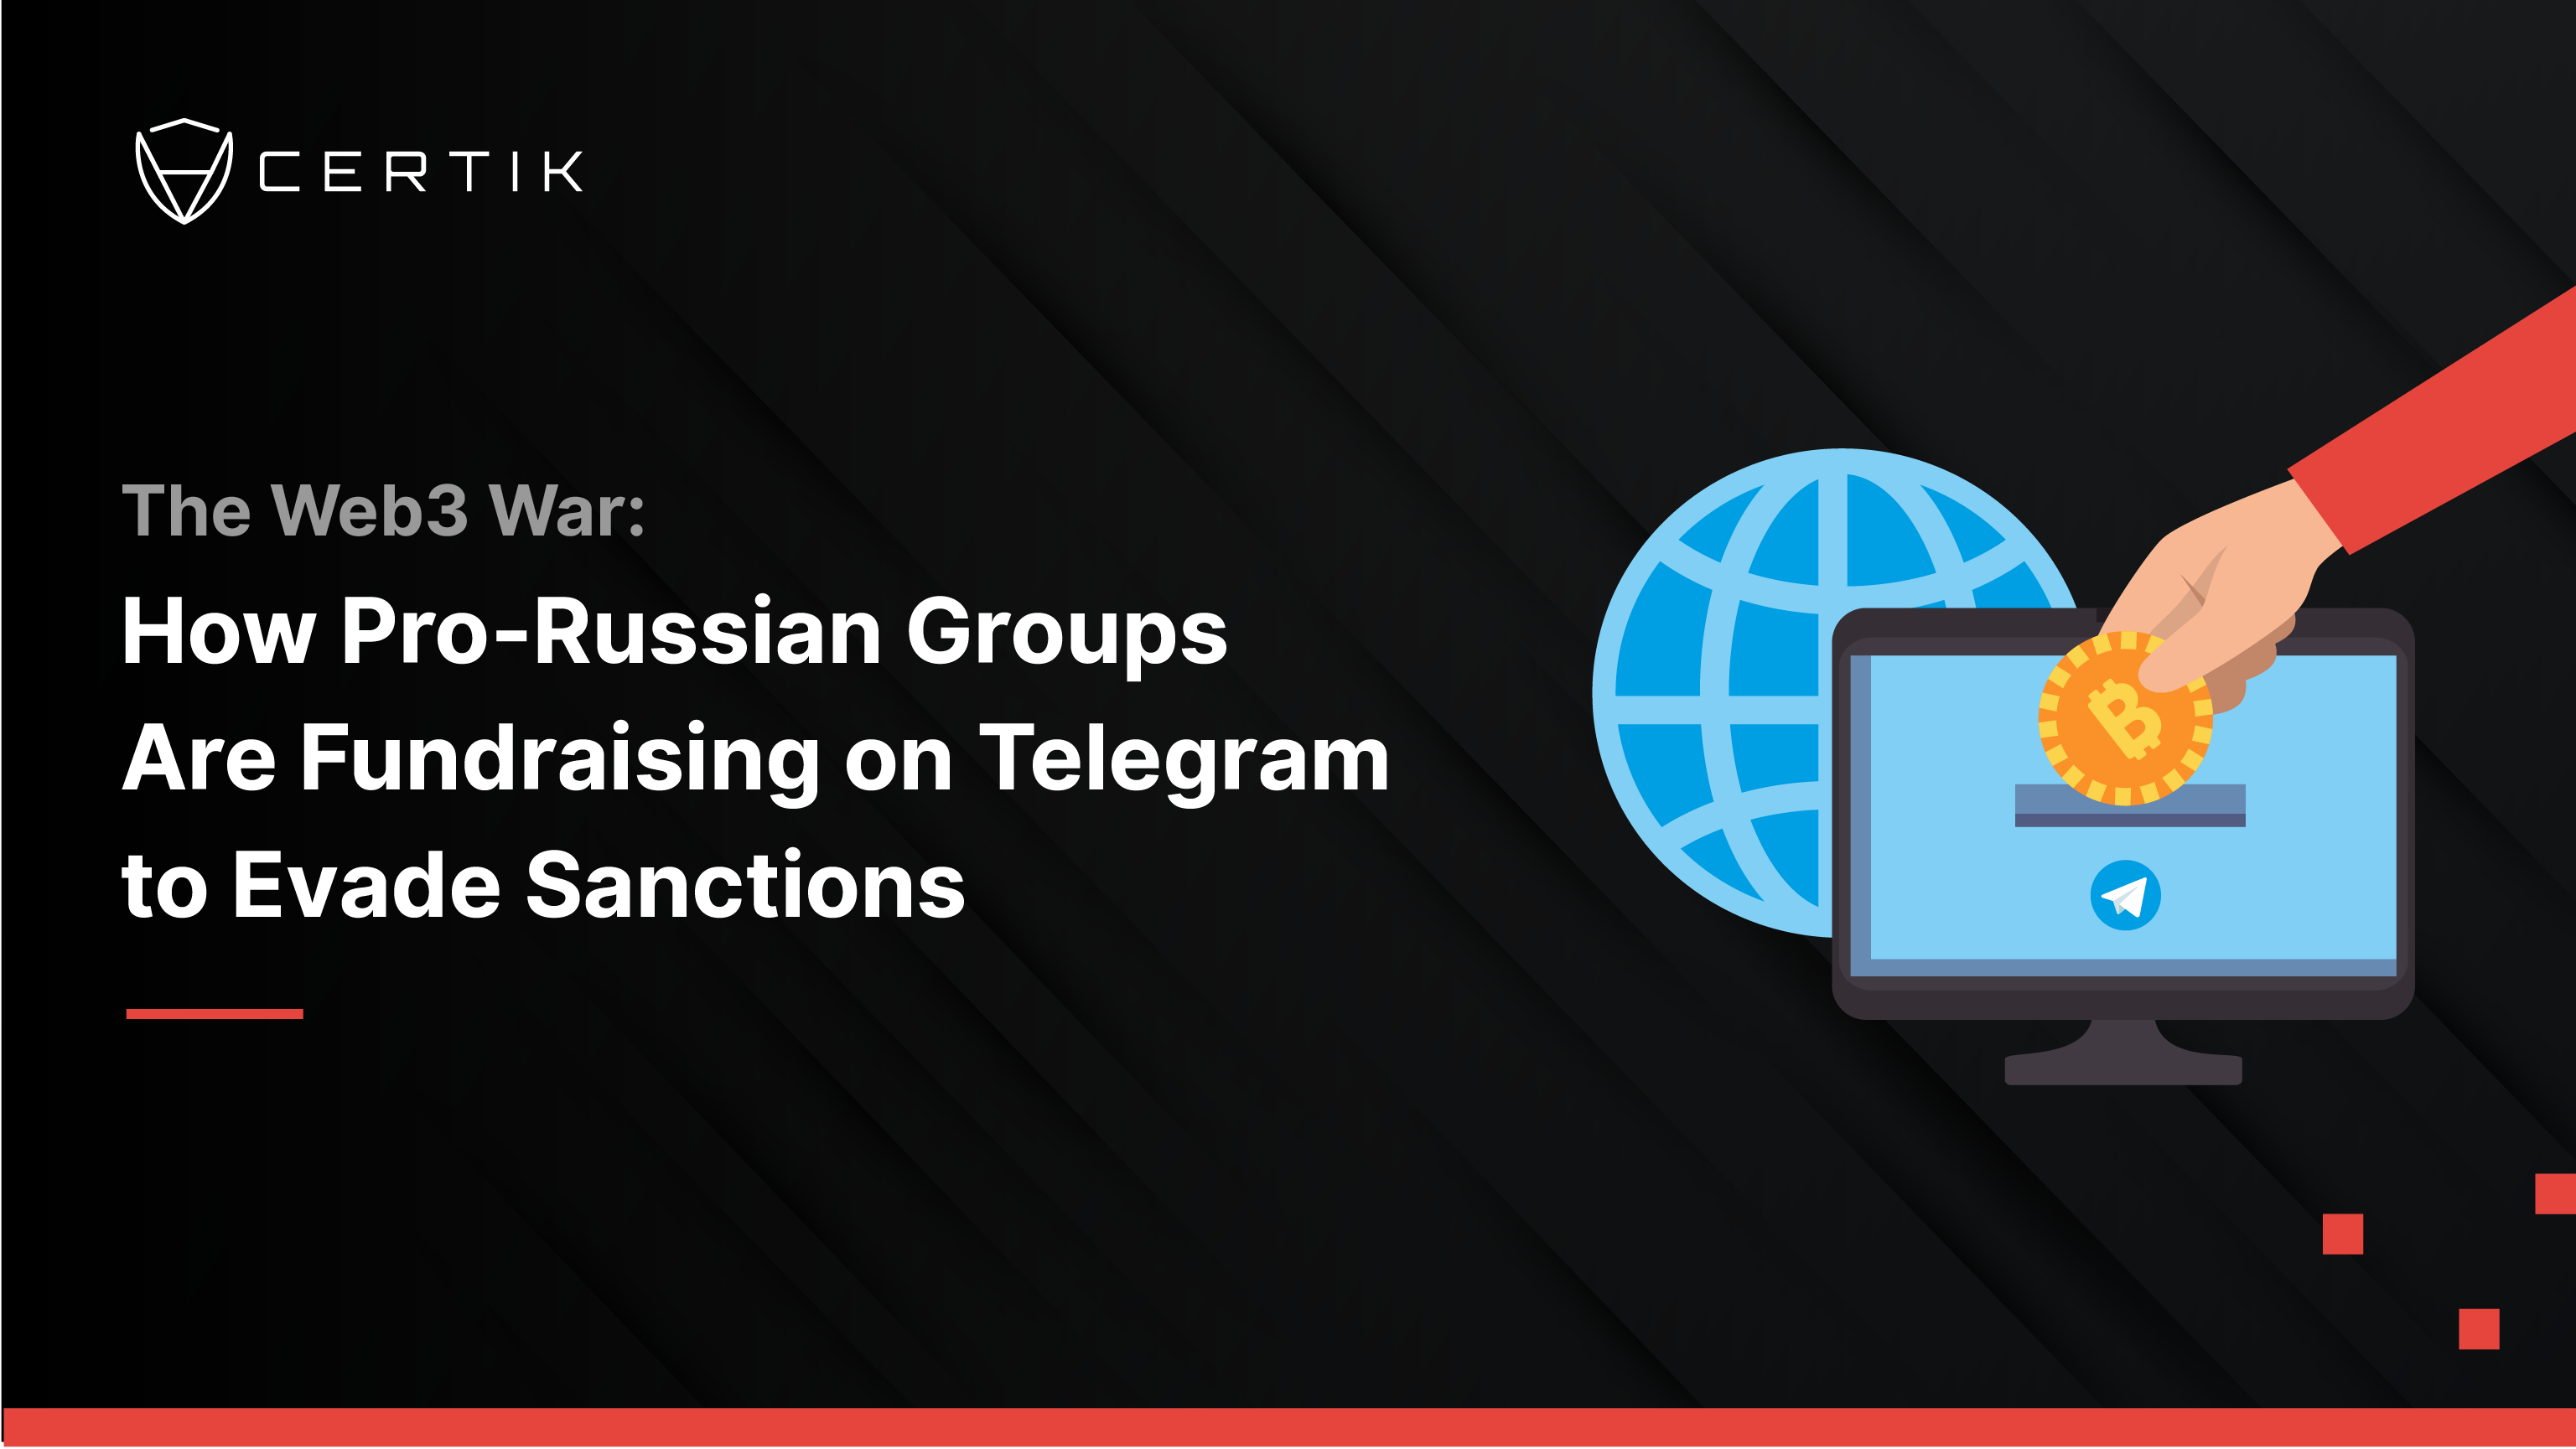 How Pro-Russian Groups Are Fundraising on Telegram to Evade Sanctions